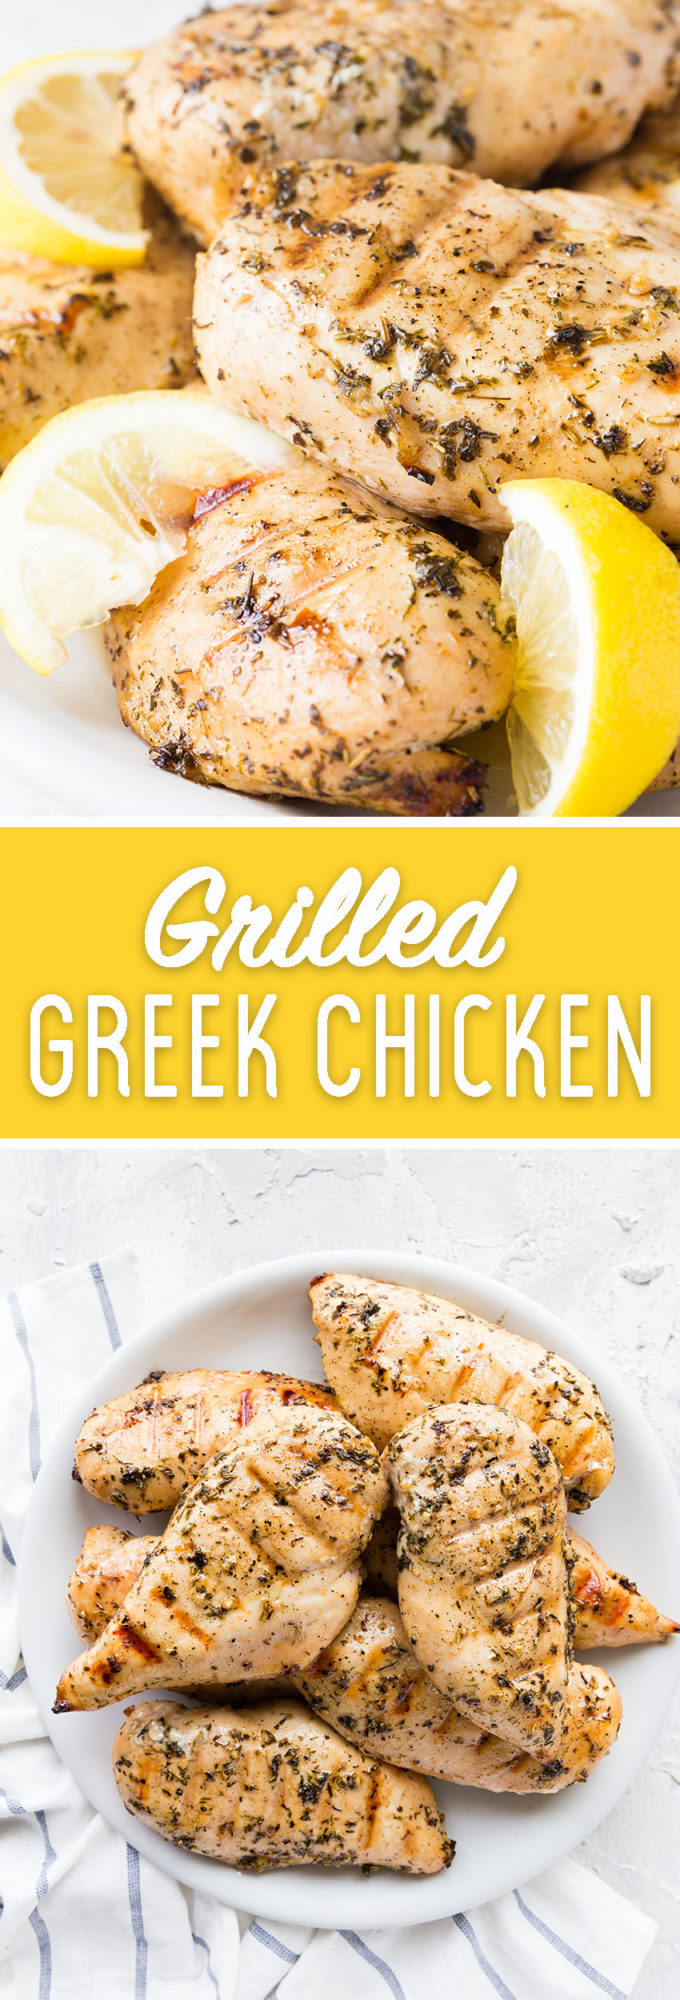 Easy to make grilled Greek chicken with the perfect marinade